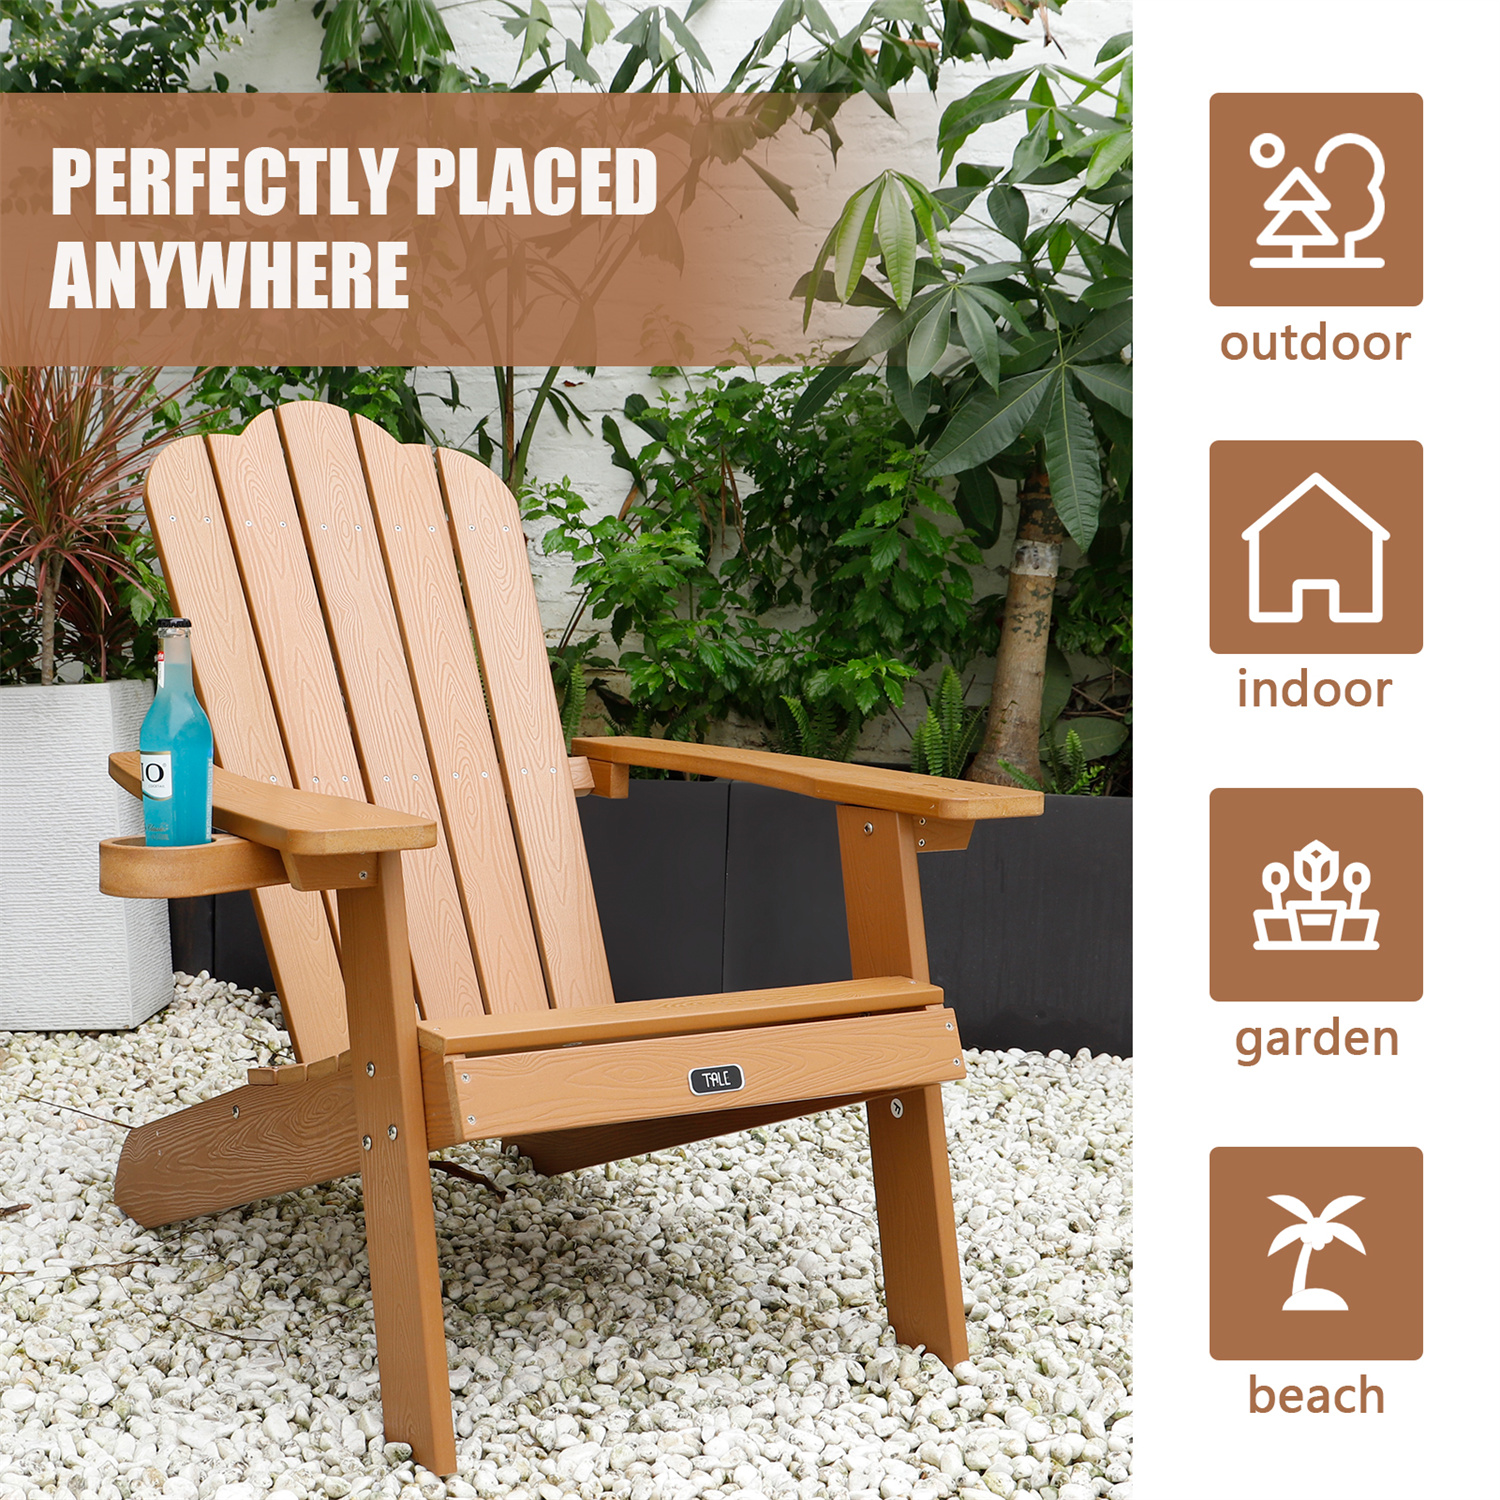 Oversized Folding Adirondack Chair with Cup Holder, Fade-Resistant Lounge Chair, 380lbs Capacity, All-Weather Chair for Lawn Outdoor Patio Deck Garden Porch Lawn, Brown - image 3 of 7